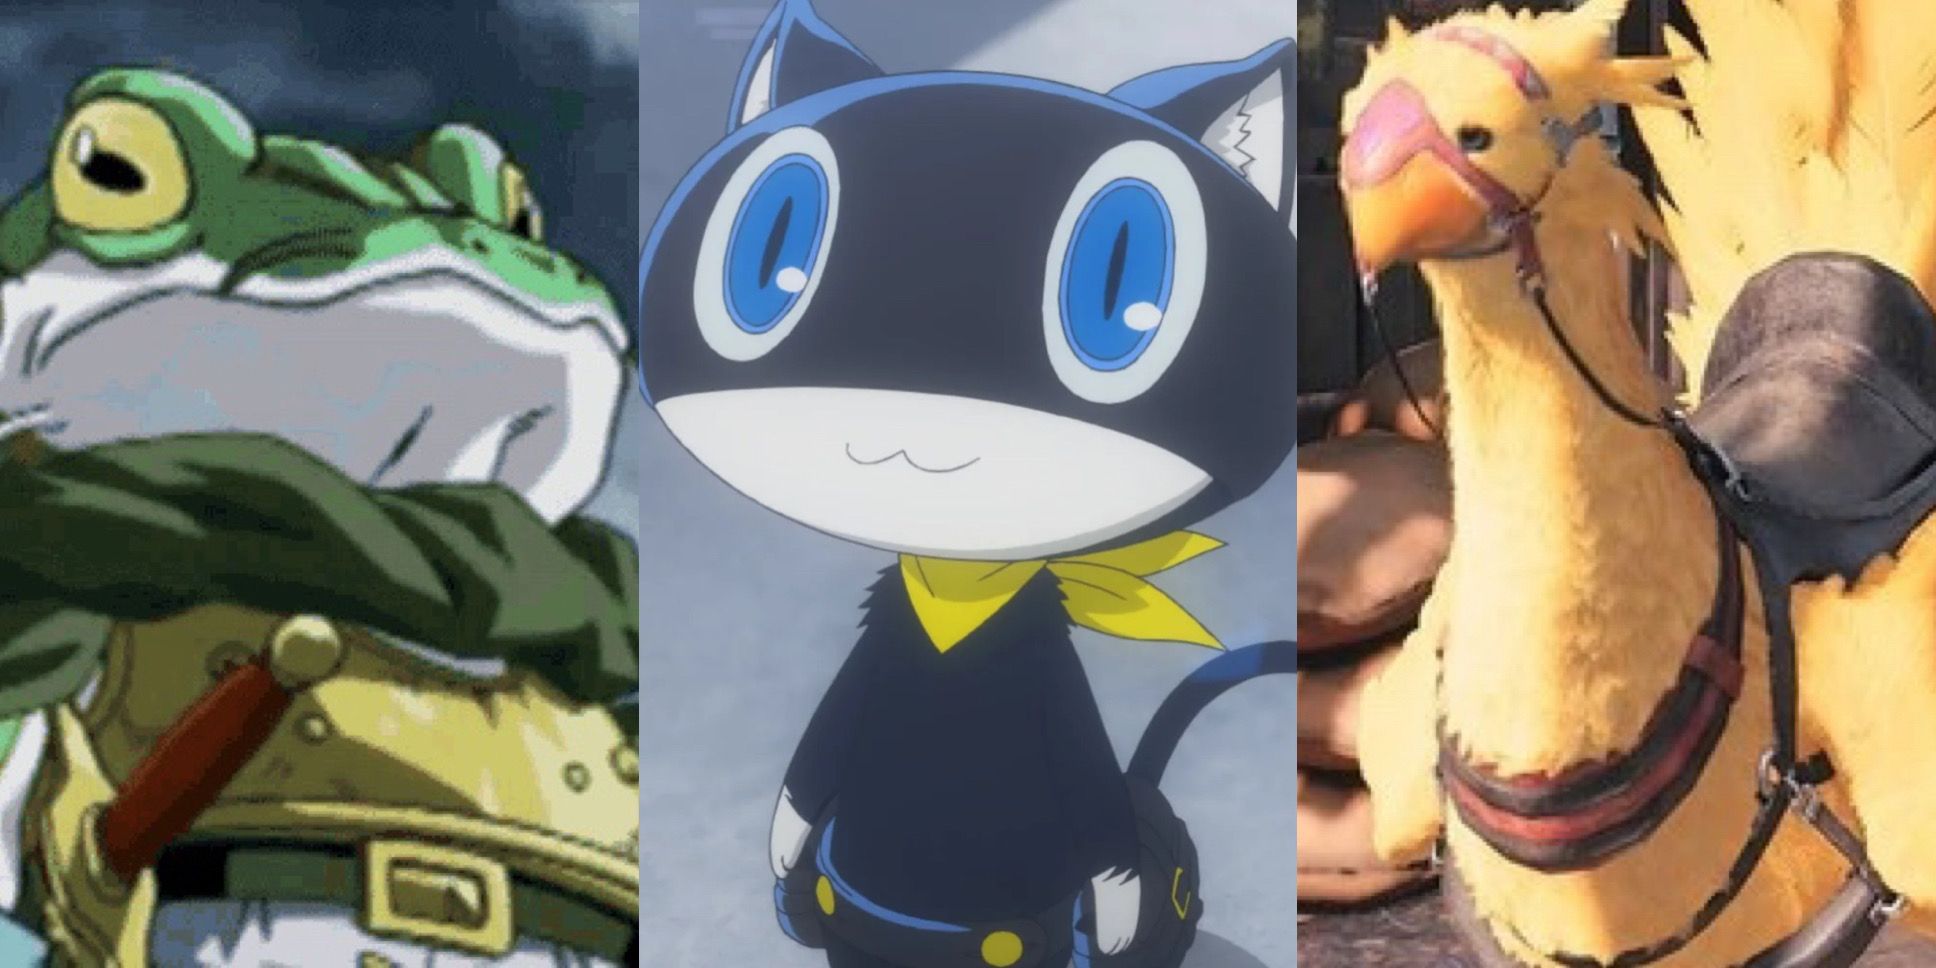 A split image of Frog from Chrono trigger, Morgana from Persona 5 and Chocobo from Final Fantasy